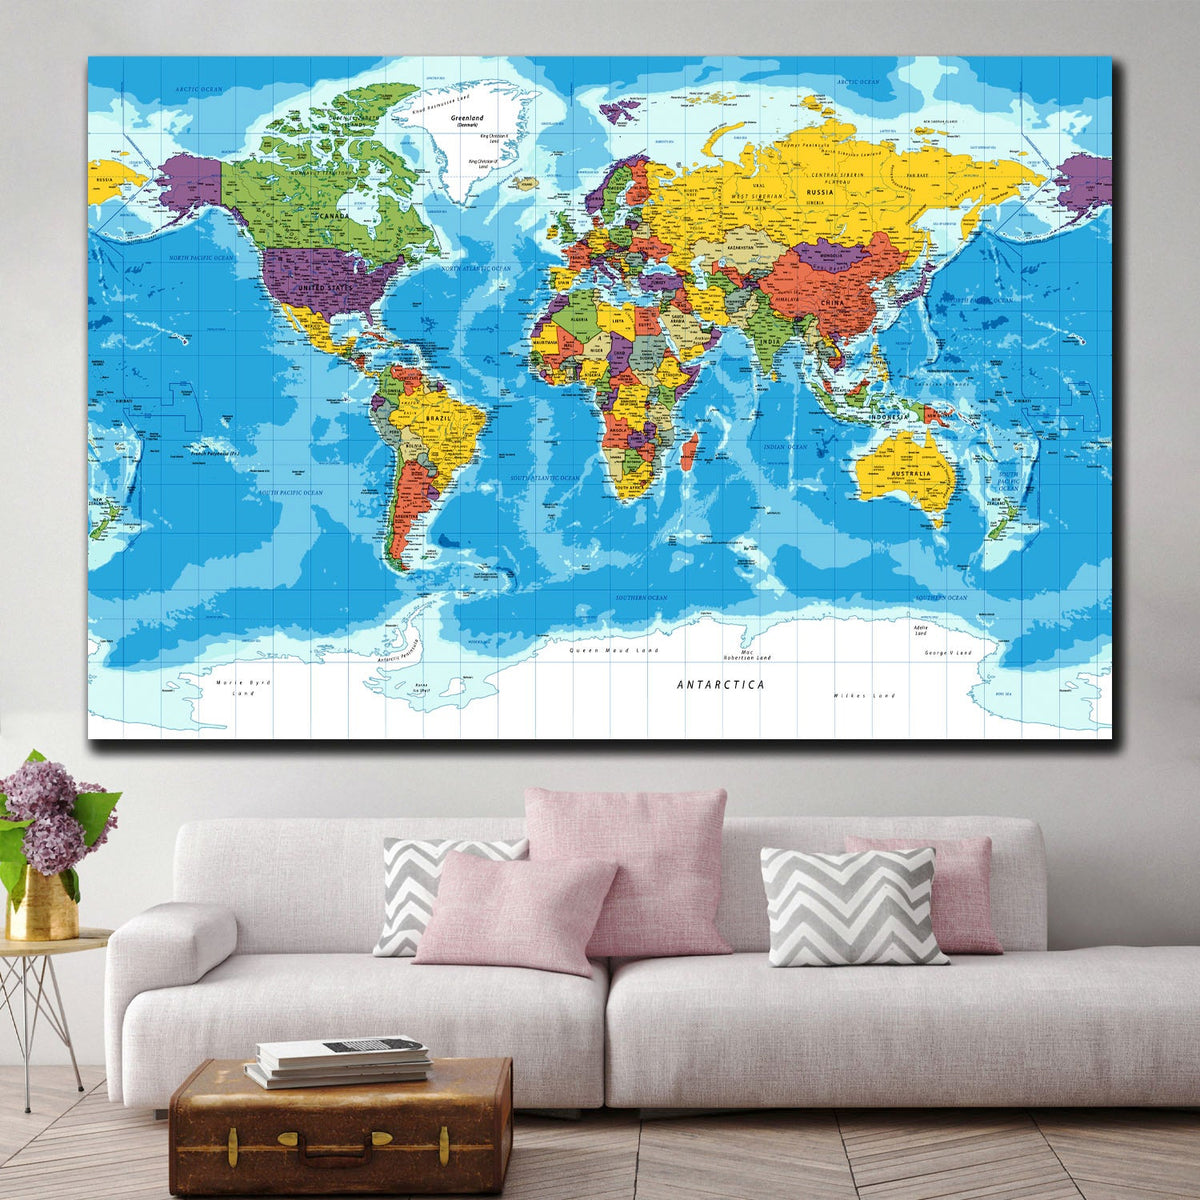 https://cdn.shopify.com/s/files/1/0387/9986/8044/products/MapoftheWorldinColourCanvasArtprintStretched-1.jpg